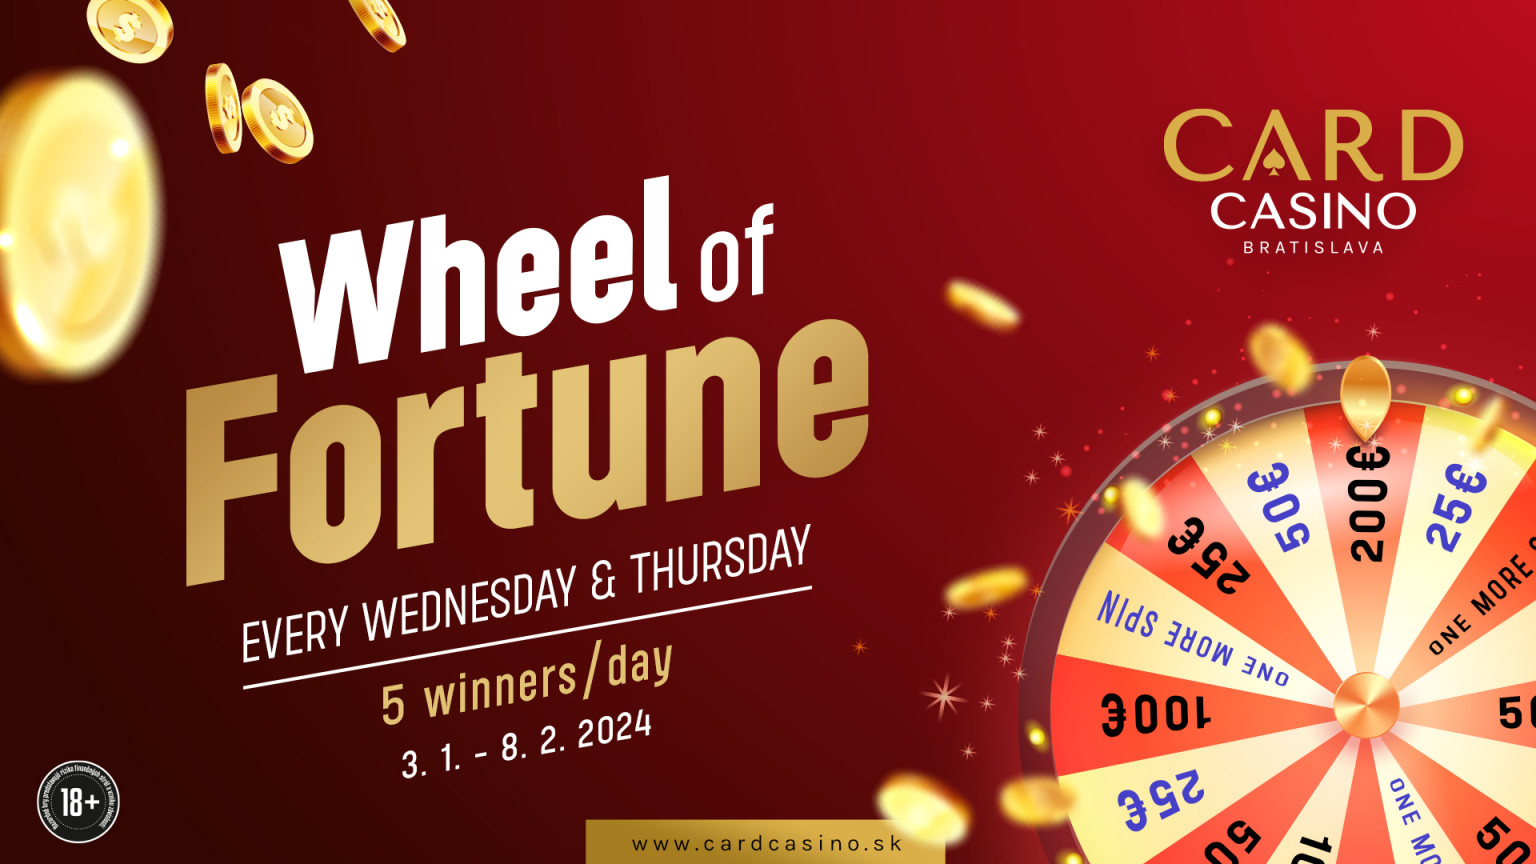 Also in January, the Wheel of Fortune is spinning. Beautiful prizes await you